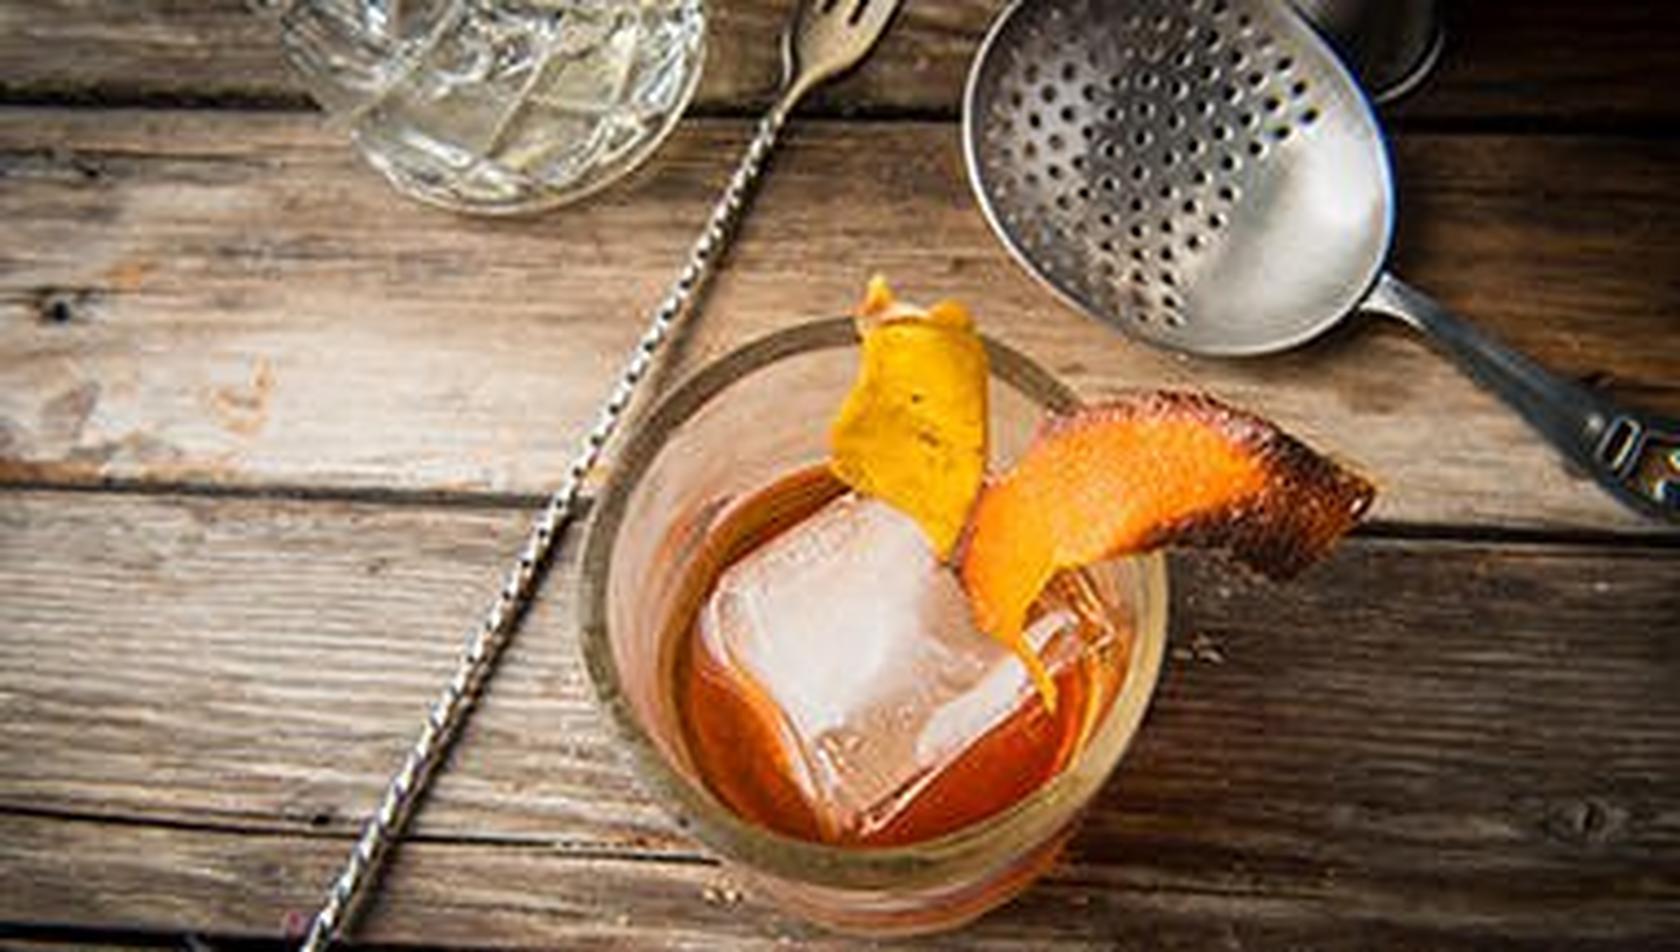 Cocktails: Smoked Ice with John Dudley